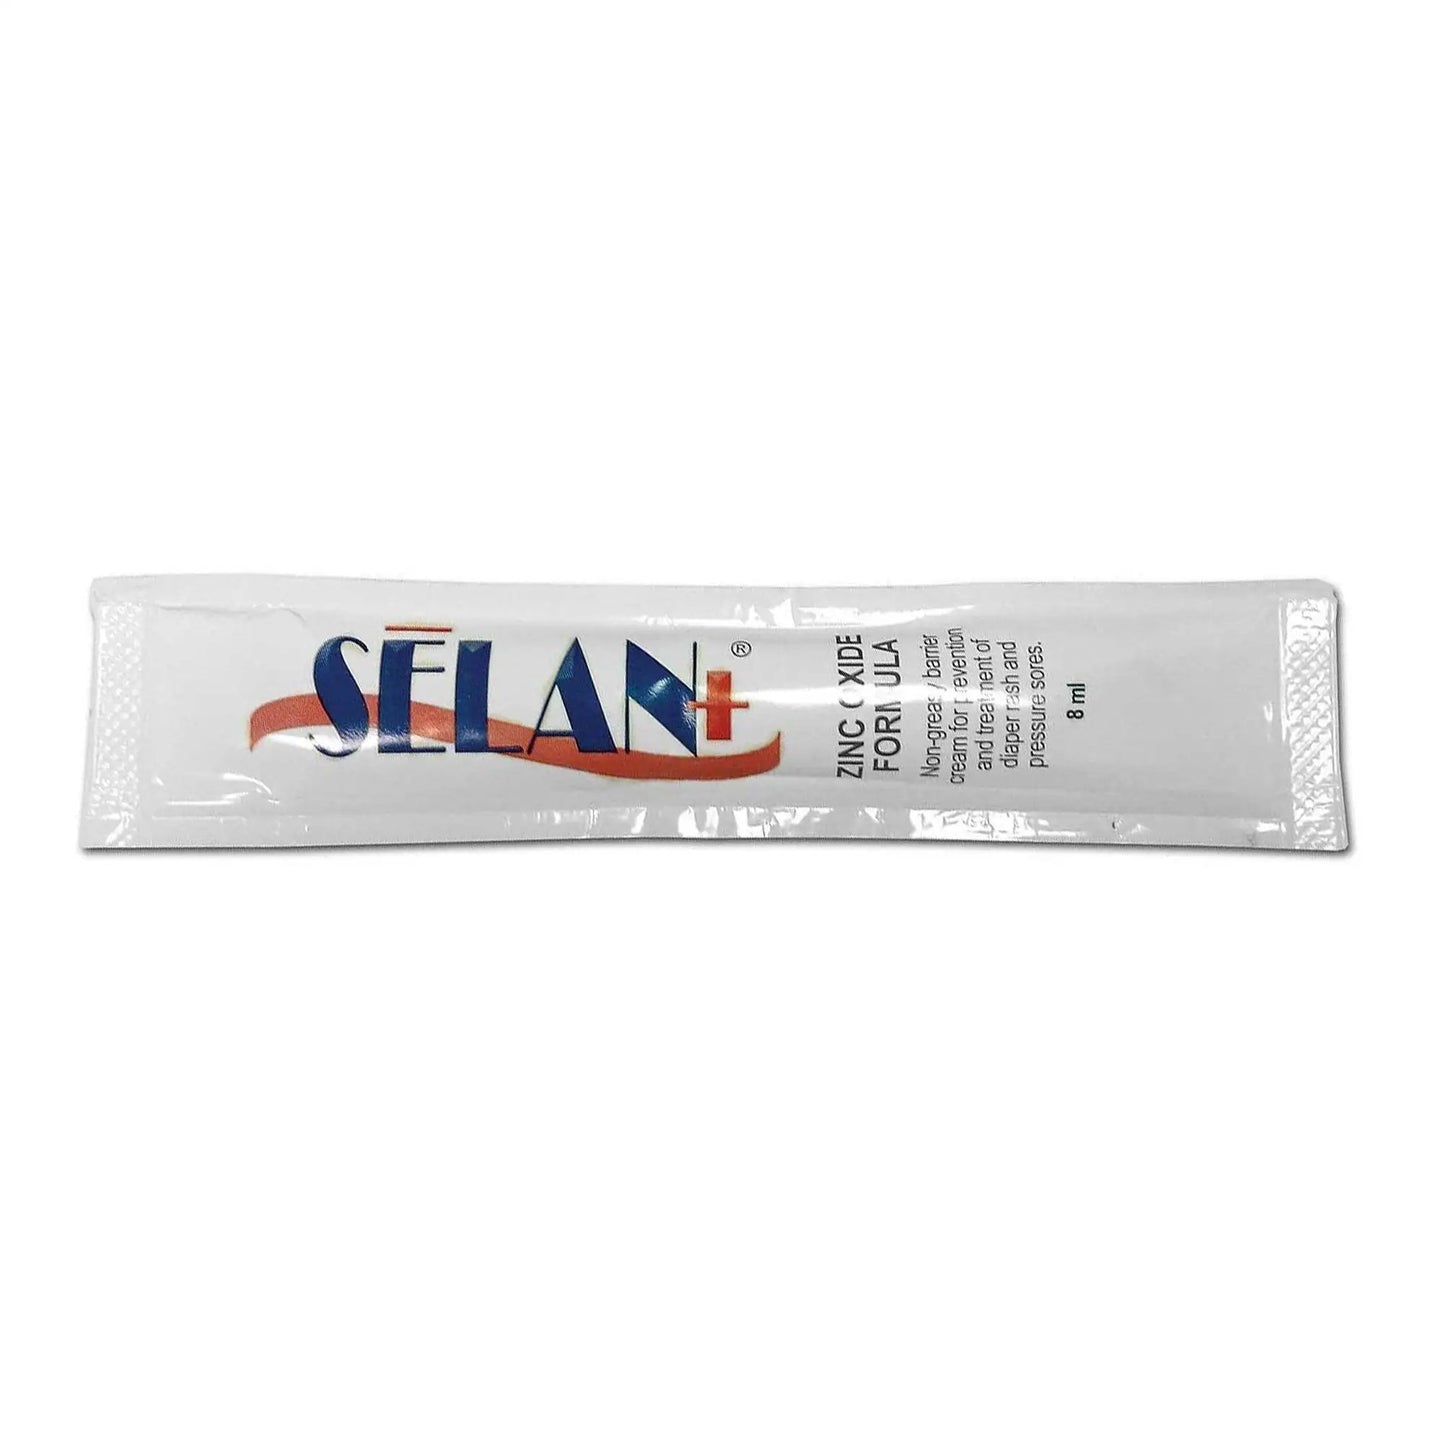 Selan+ Zinc Oxide Barrier Cream and Lotion, 8 mL Individual Packet